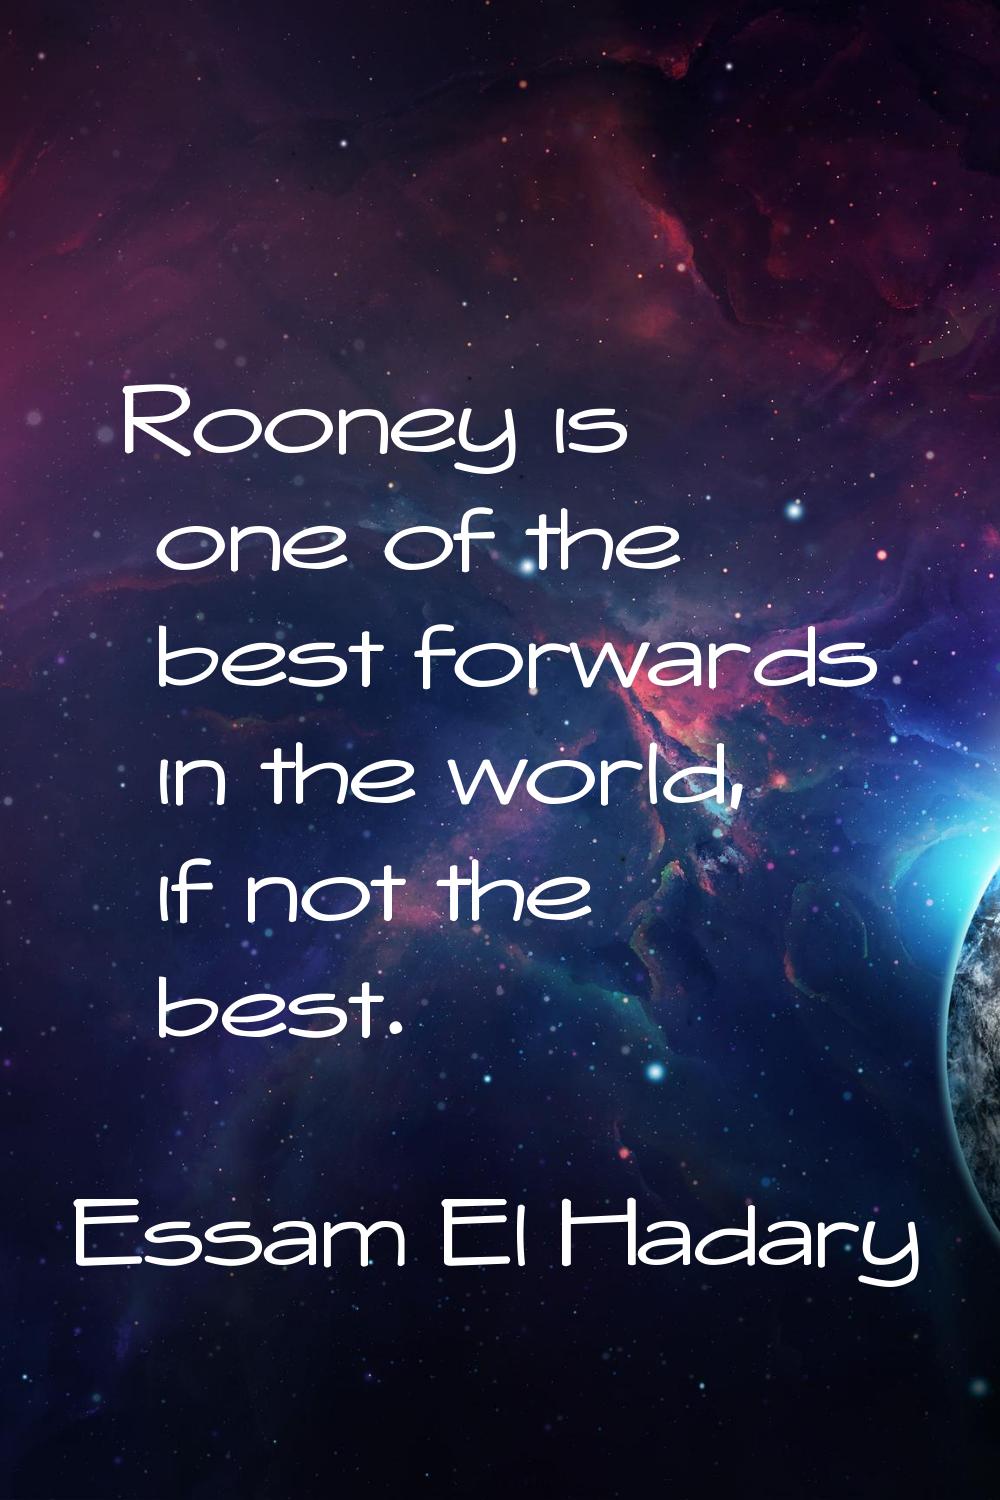 Rooney is one of the best forwards in the world, if not the best.